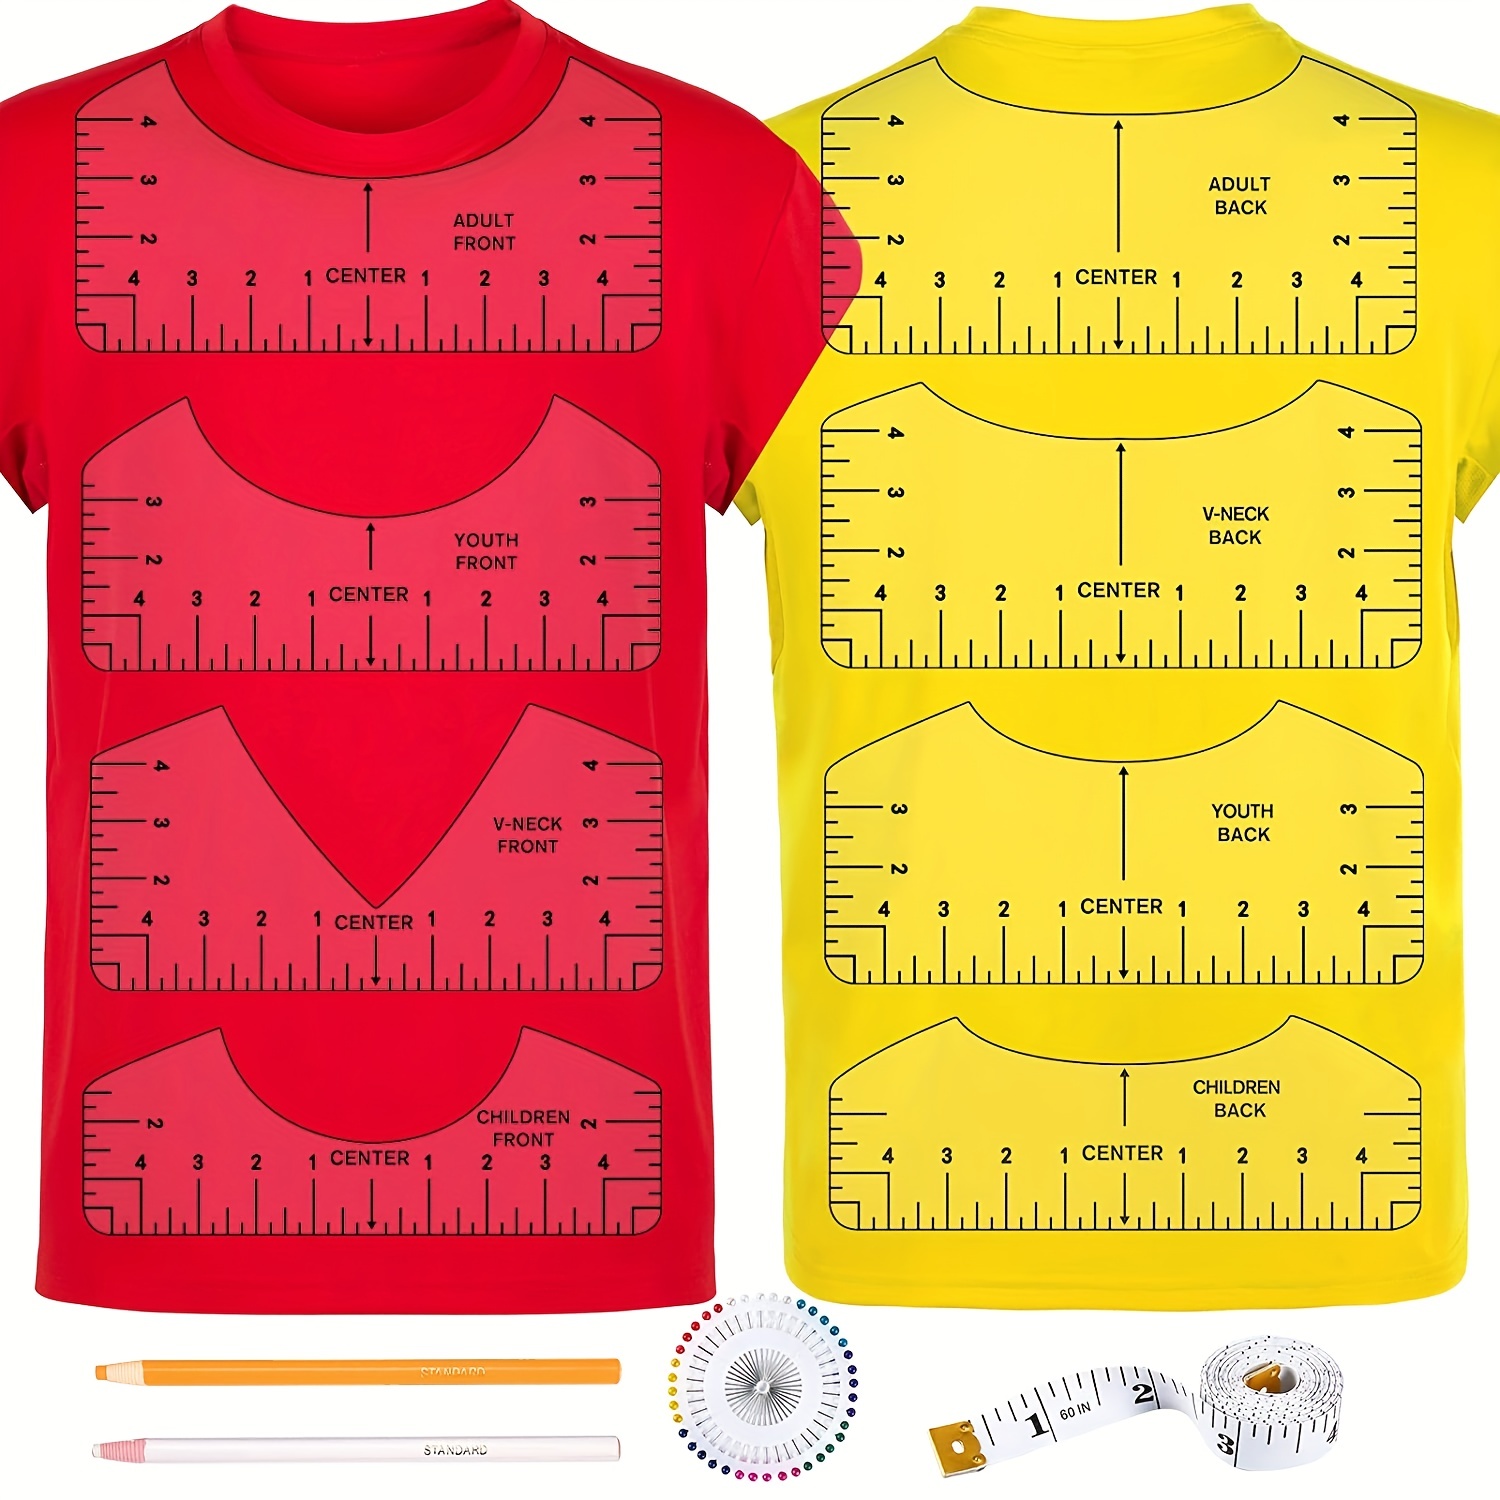  A Tshirt Ruler Guide for Vinyl Alignment and Accurate